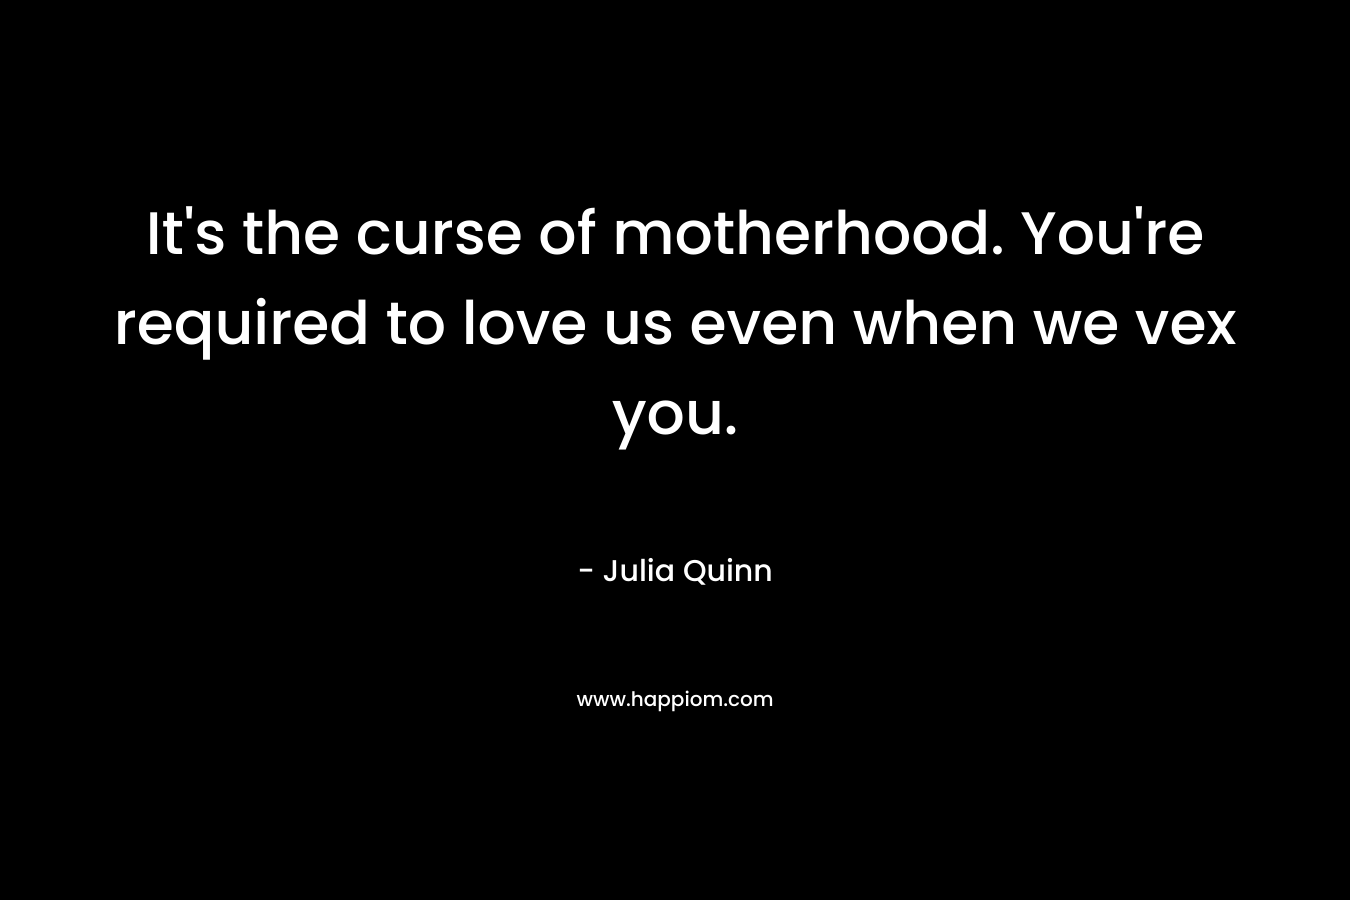 It’s the curse of motherhood. You’re required to love us even when we vex you. – Julia Quinn